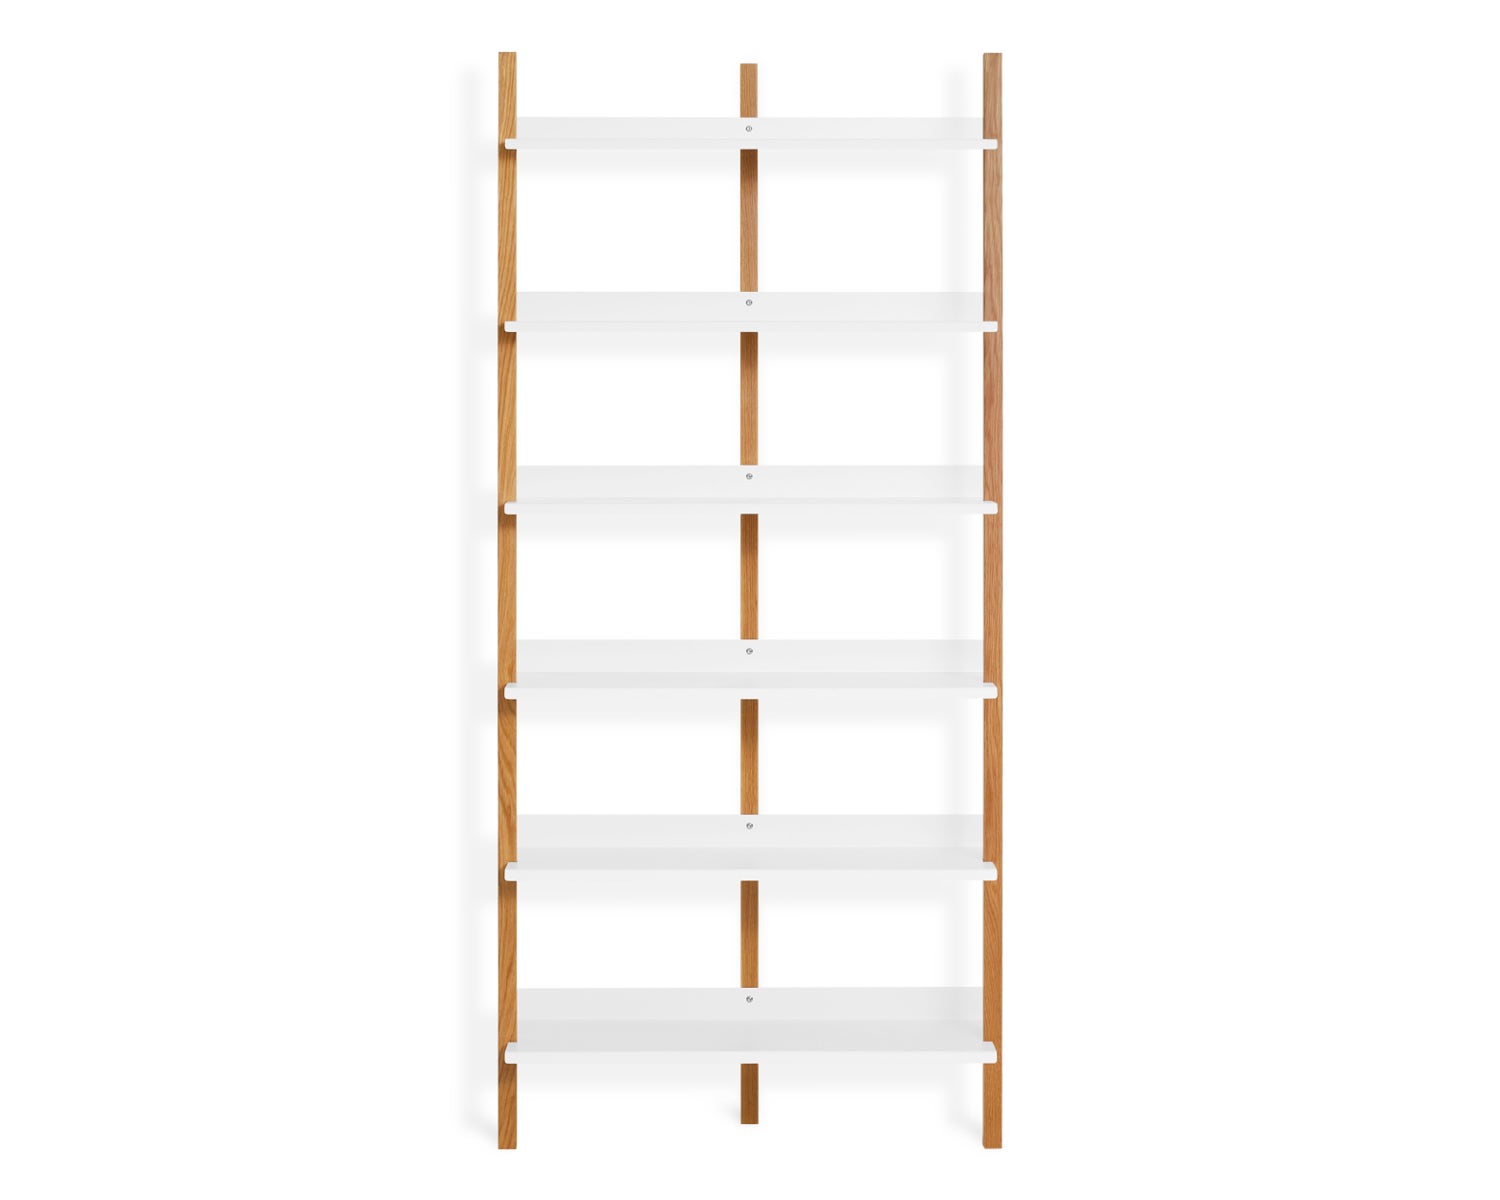 https://www.bludot.com/media/catalog/product/b/w/bw1_bkcswo_wh-browser-tall-bookcase-white-oak-white_1.jpg?optimize=medium&fit=bounds&height=1200&width=1500&canvas=1500:1200